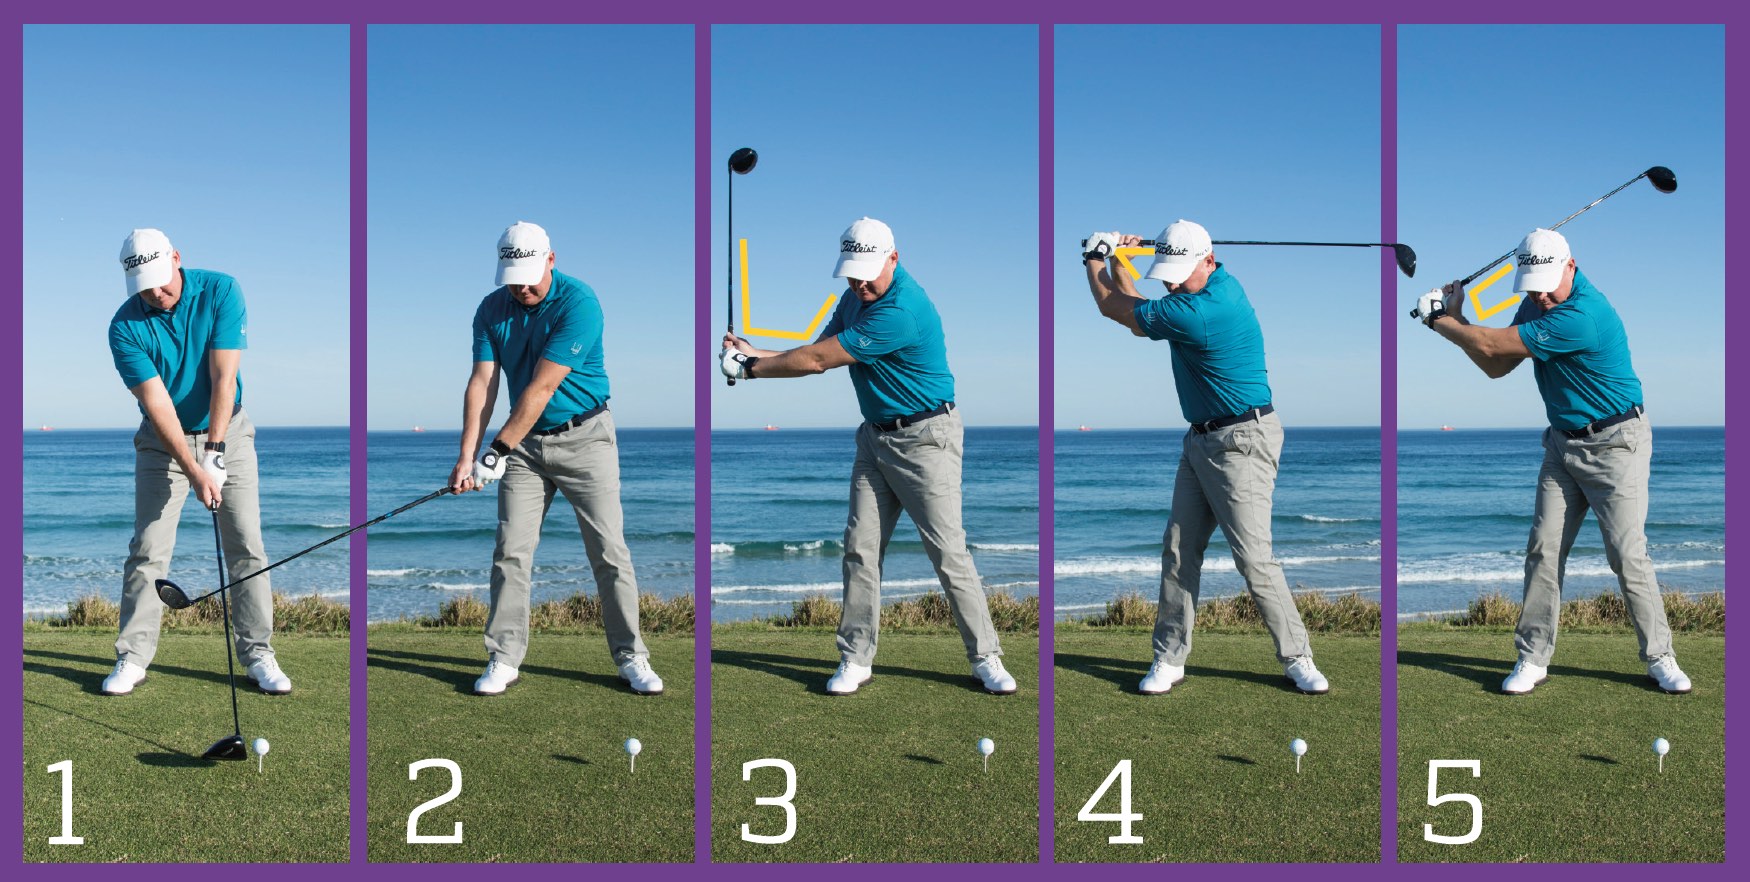 Golf instruction: Leveraging your power